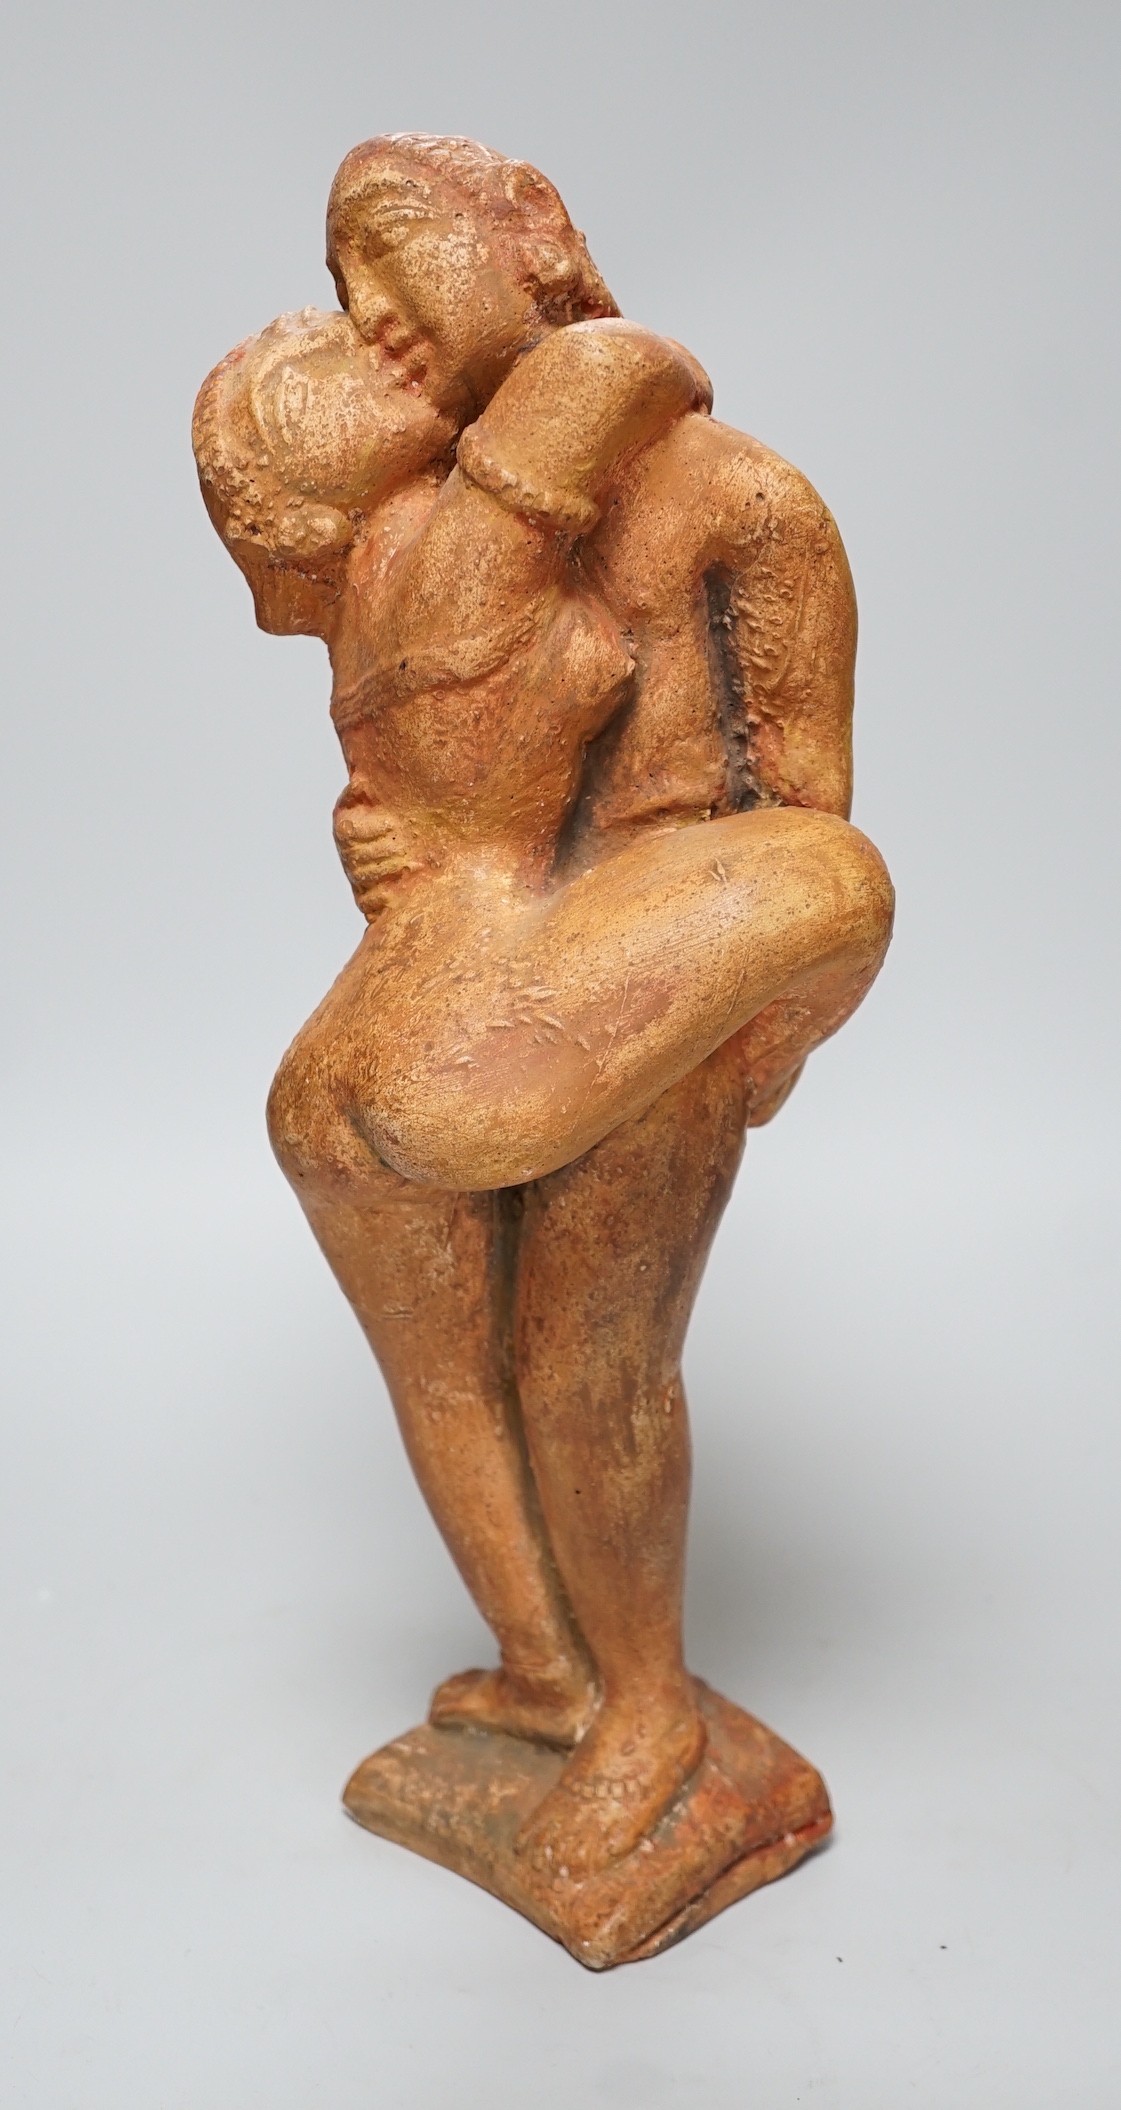 A painted plaster figure of an embracing Indian couple, 37cm tall